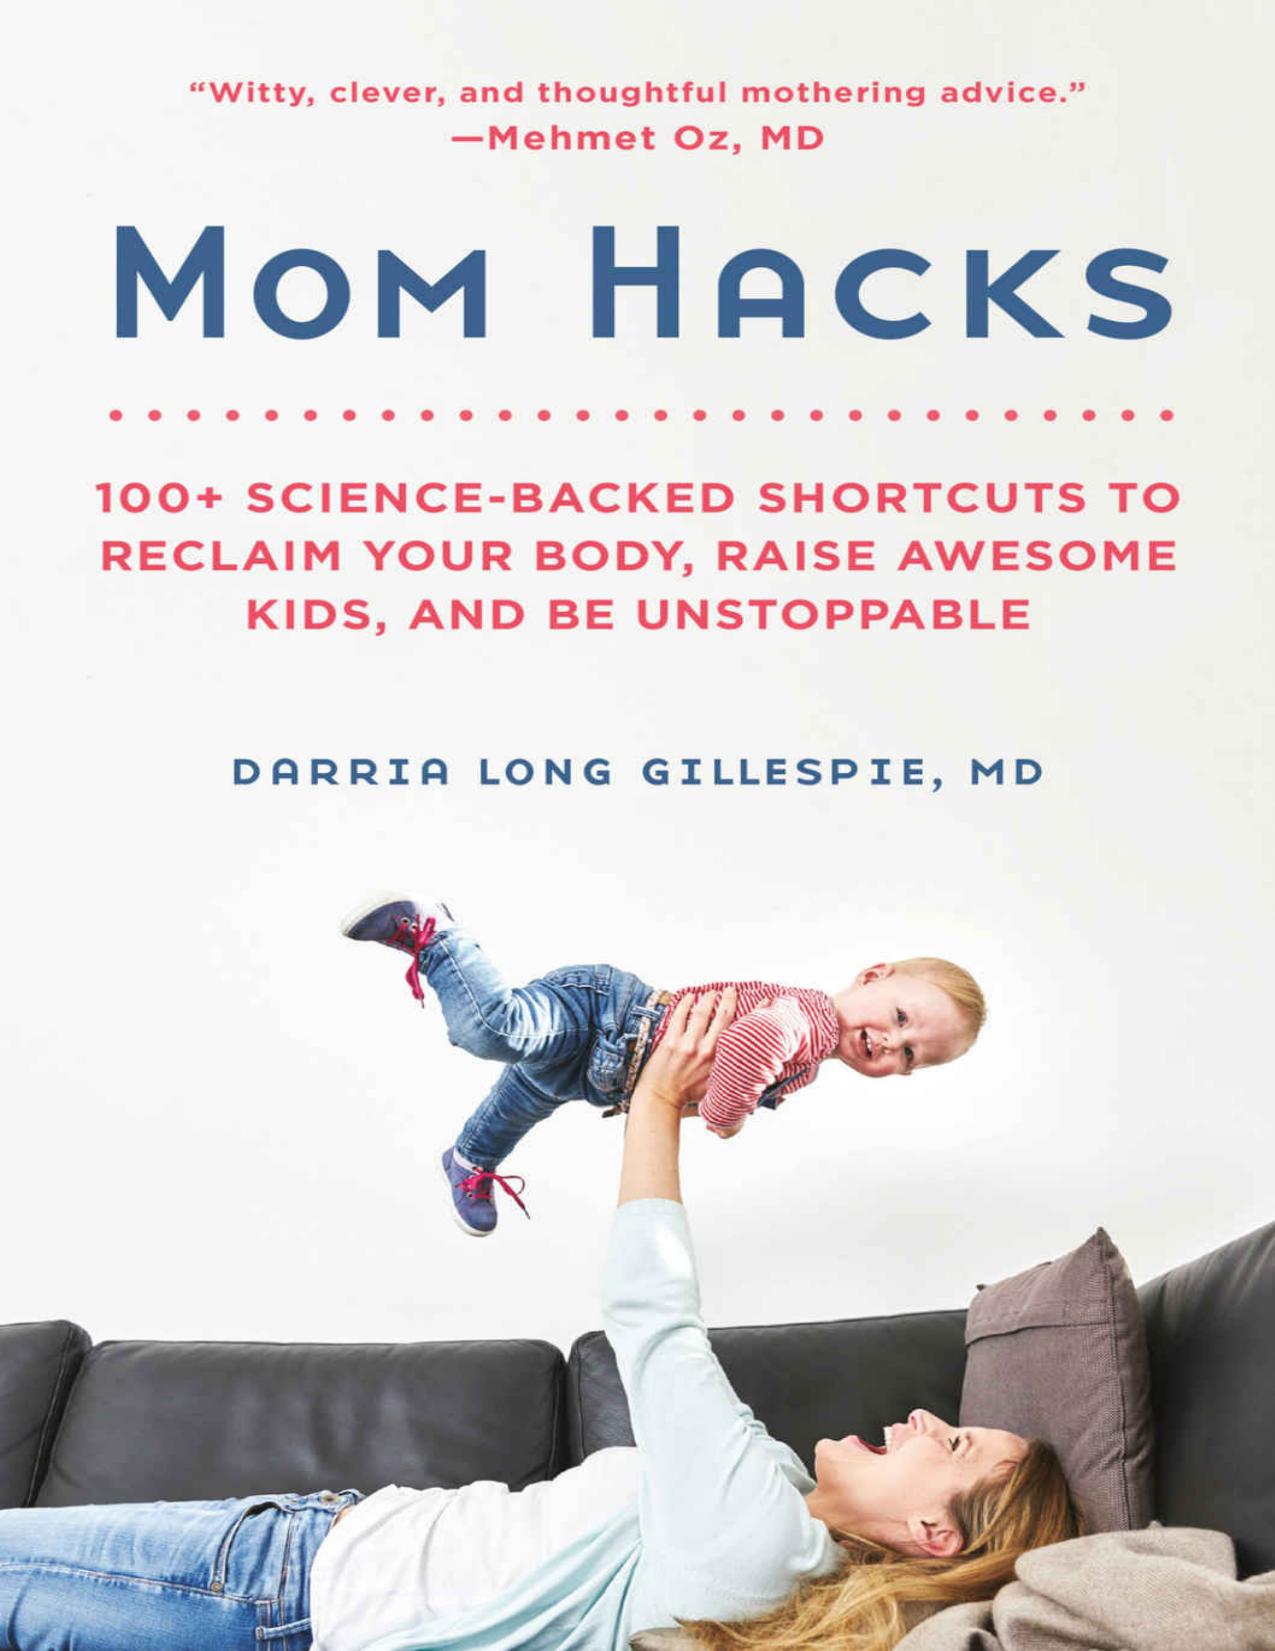 (eBook PDF)Mom Hacks: 100+ Science-Backed Shortcuts to Reclaim Your Body, Raise Awesome Kids, and Be Unstoppable by Darria Long Gillespie